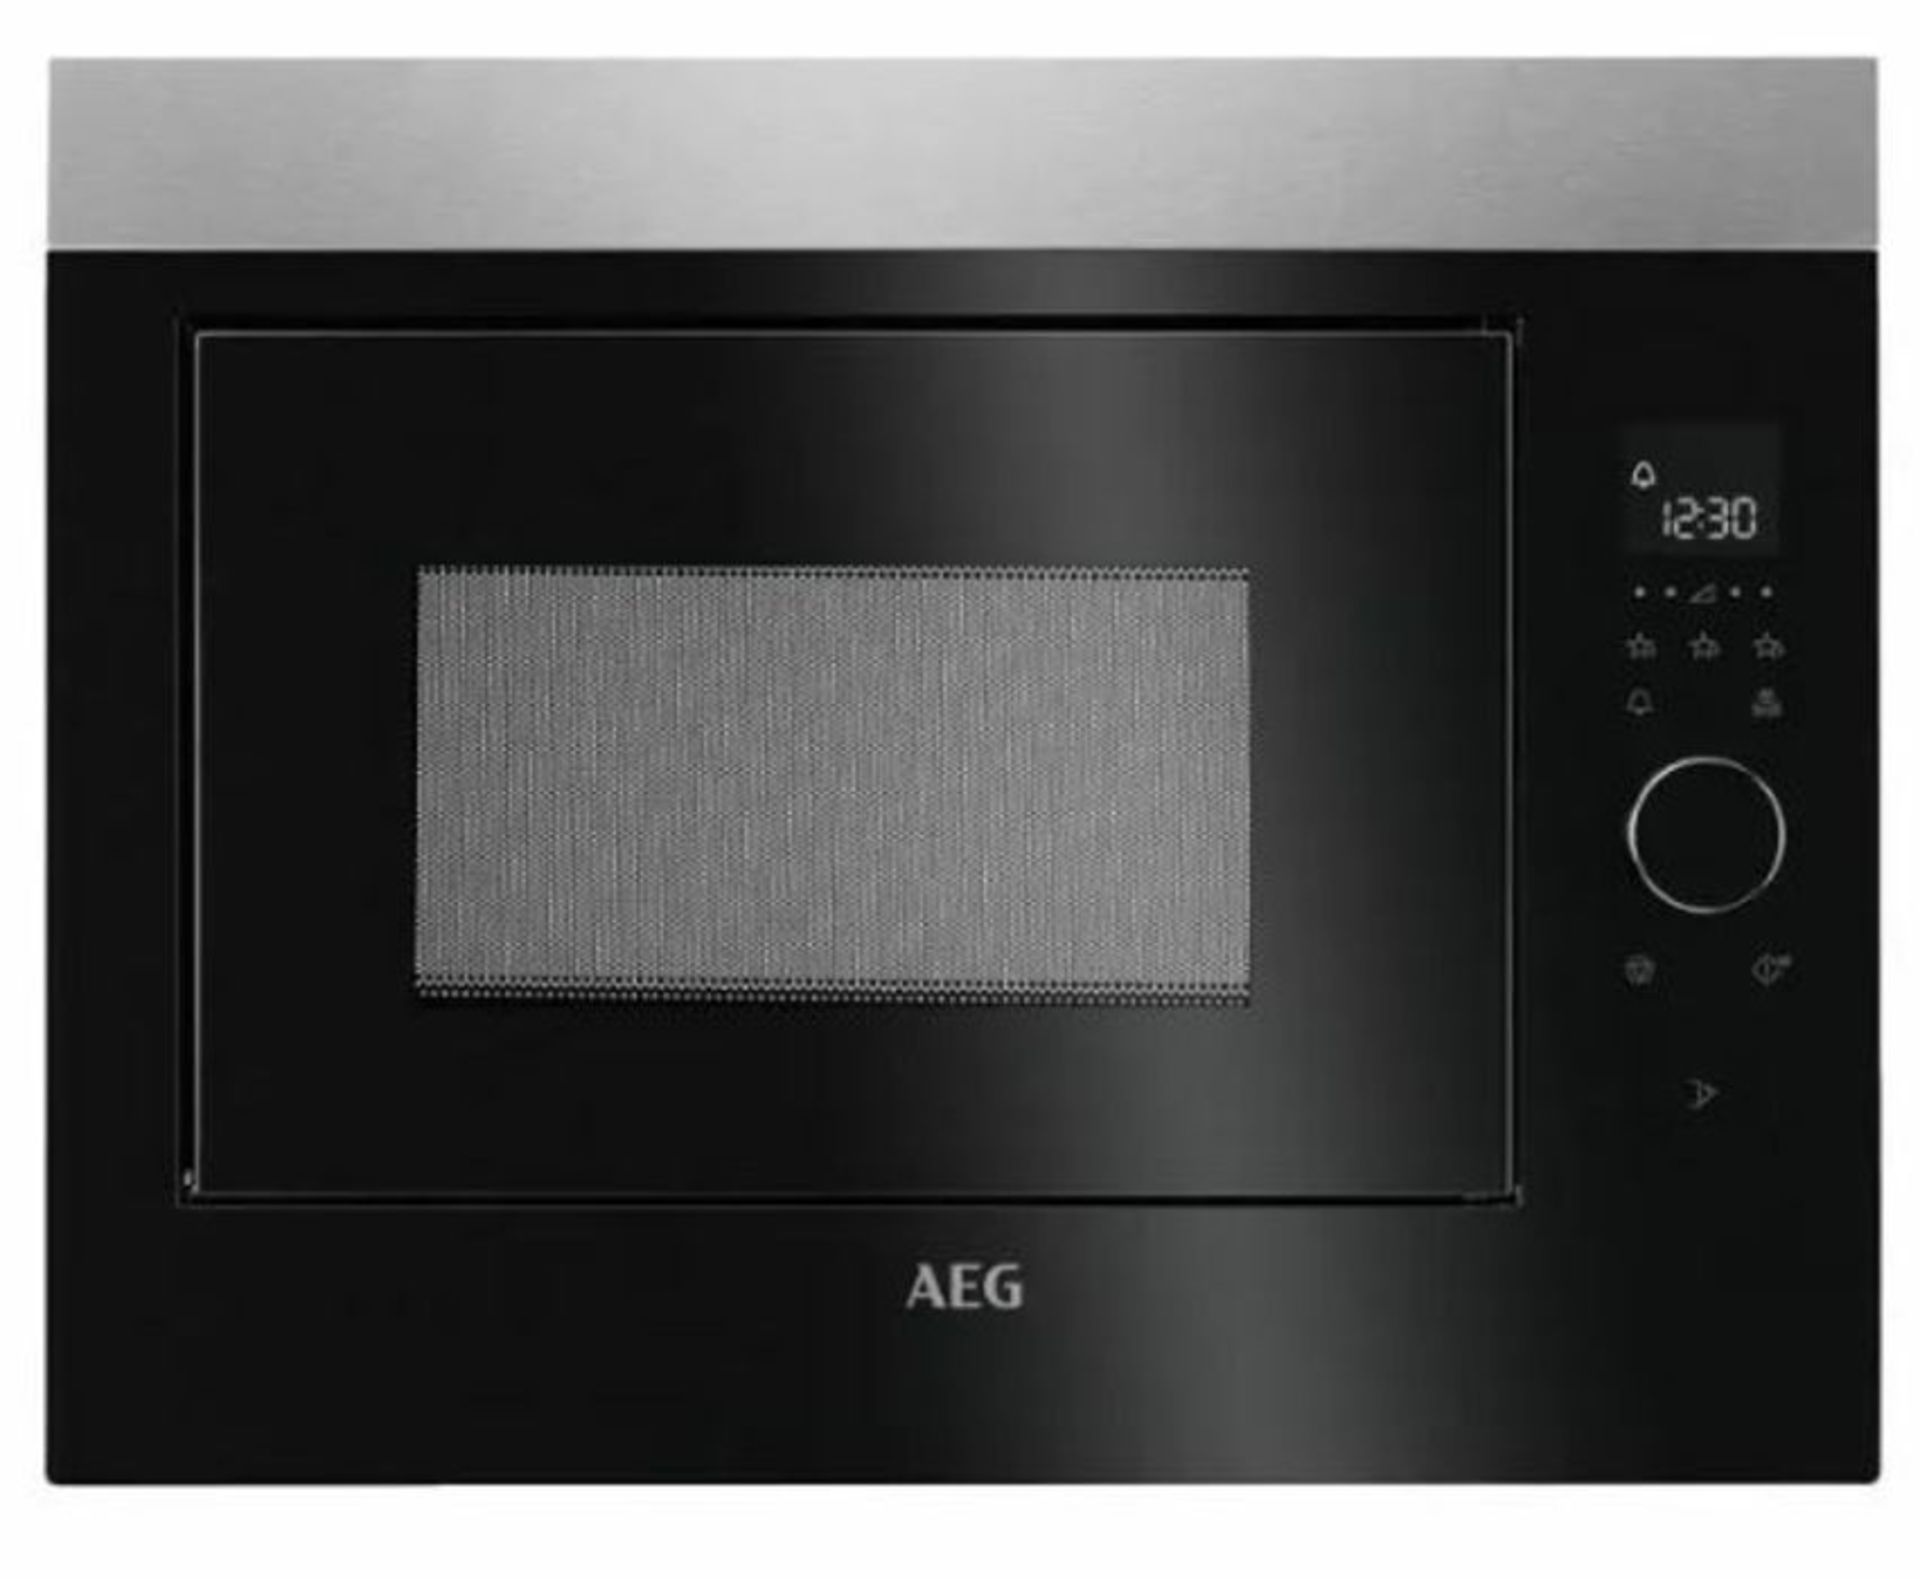 AEG MBE2658SEM BUILT-IN SOLO MICROWAVE - BLACK & STAINLESS STEEL (UNTESTED CUSTOMER RETURNS) ONE